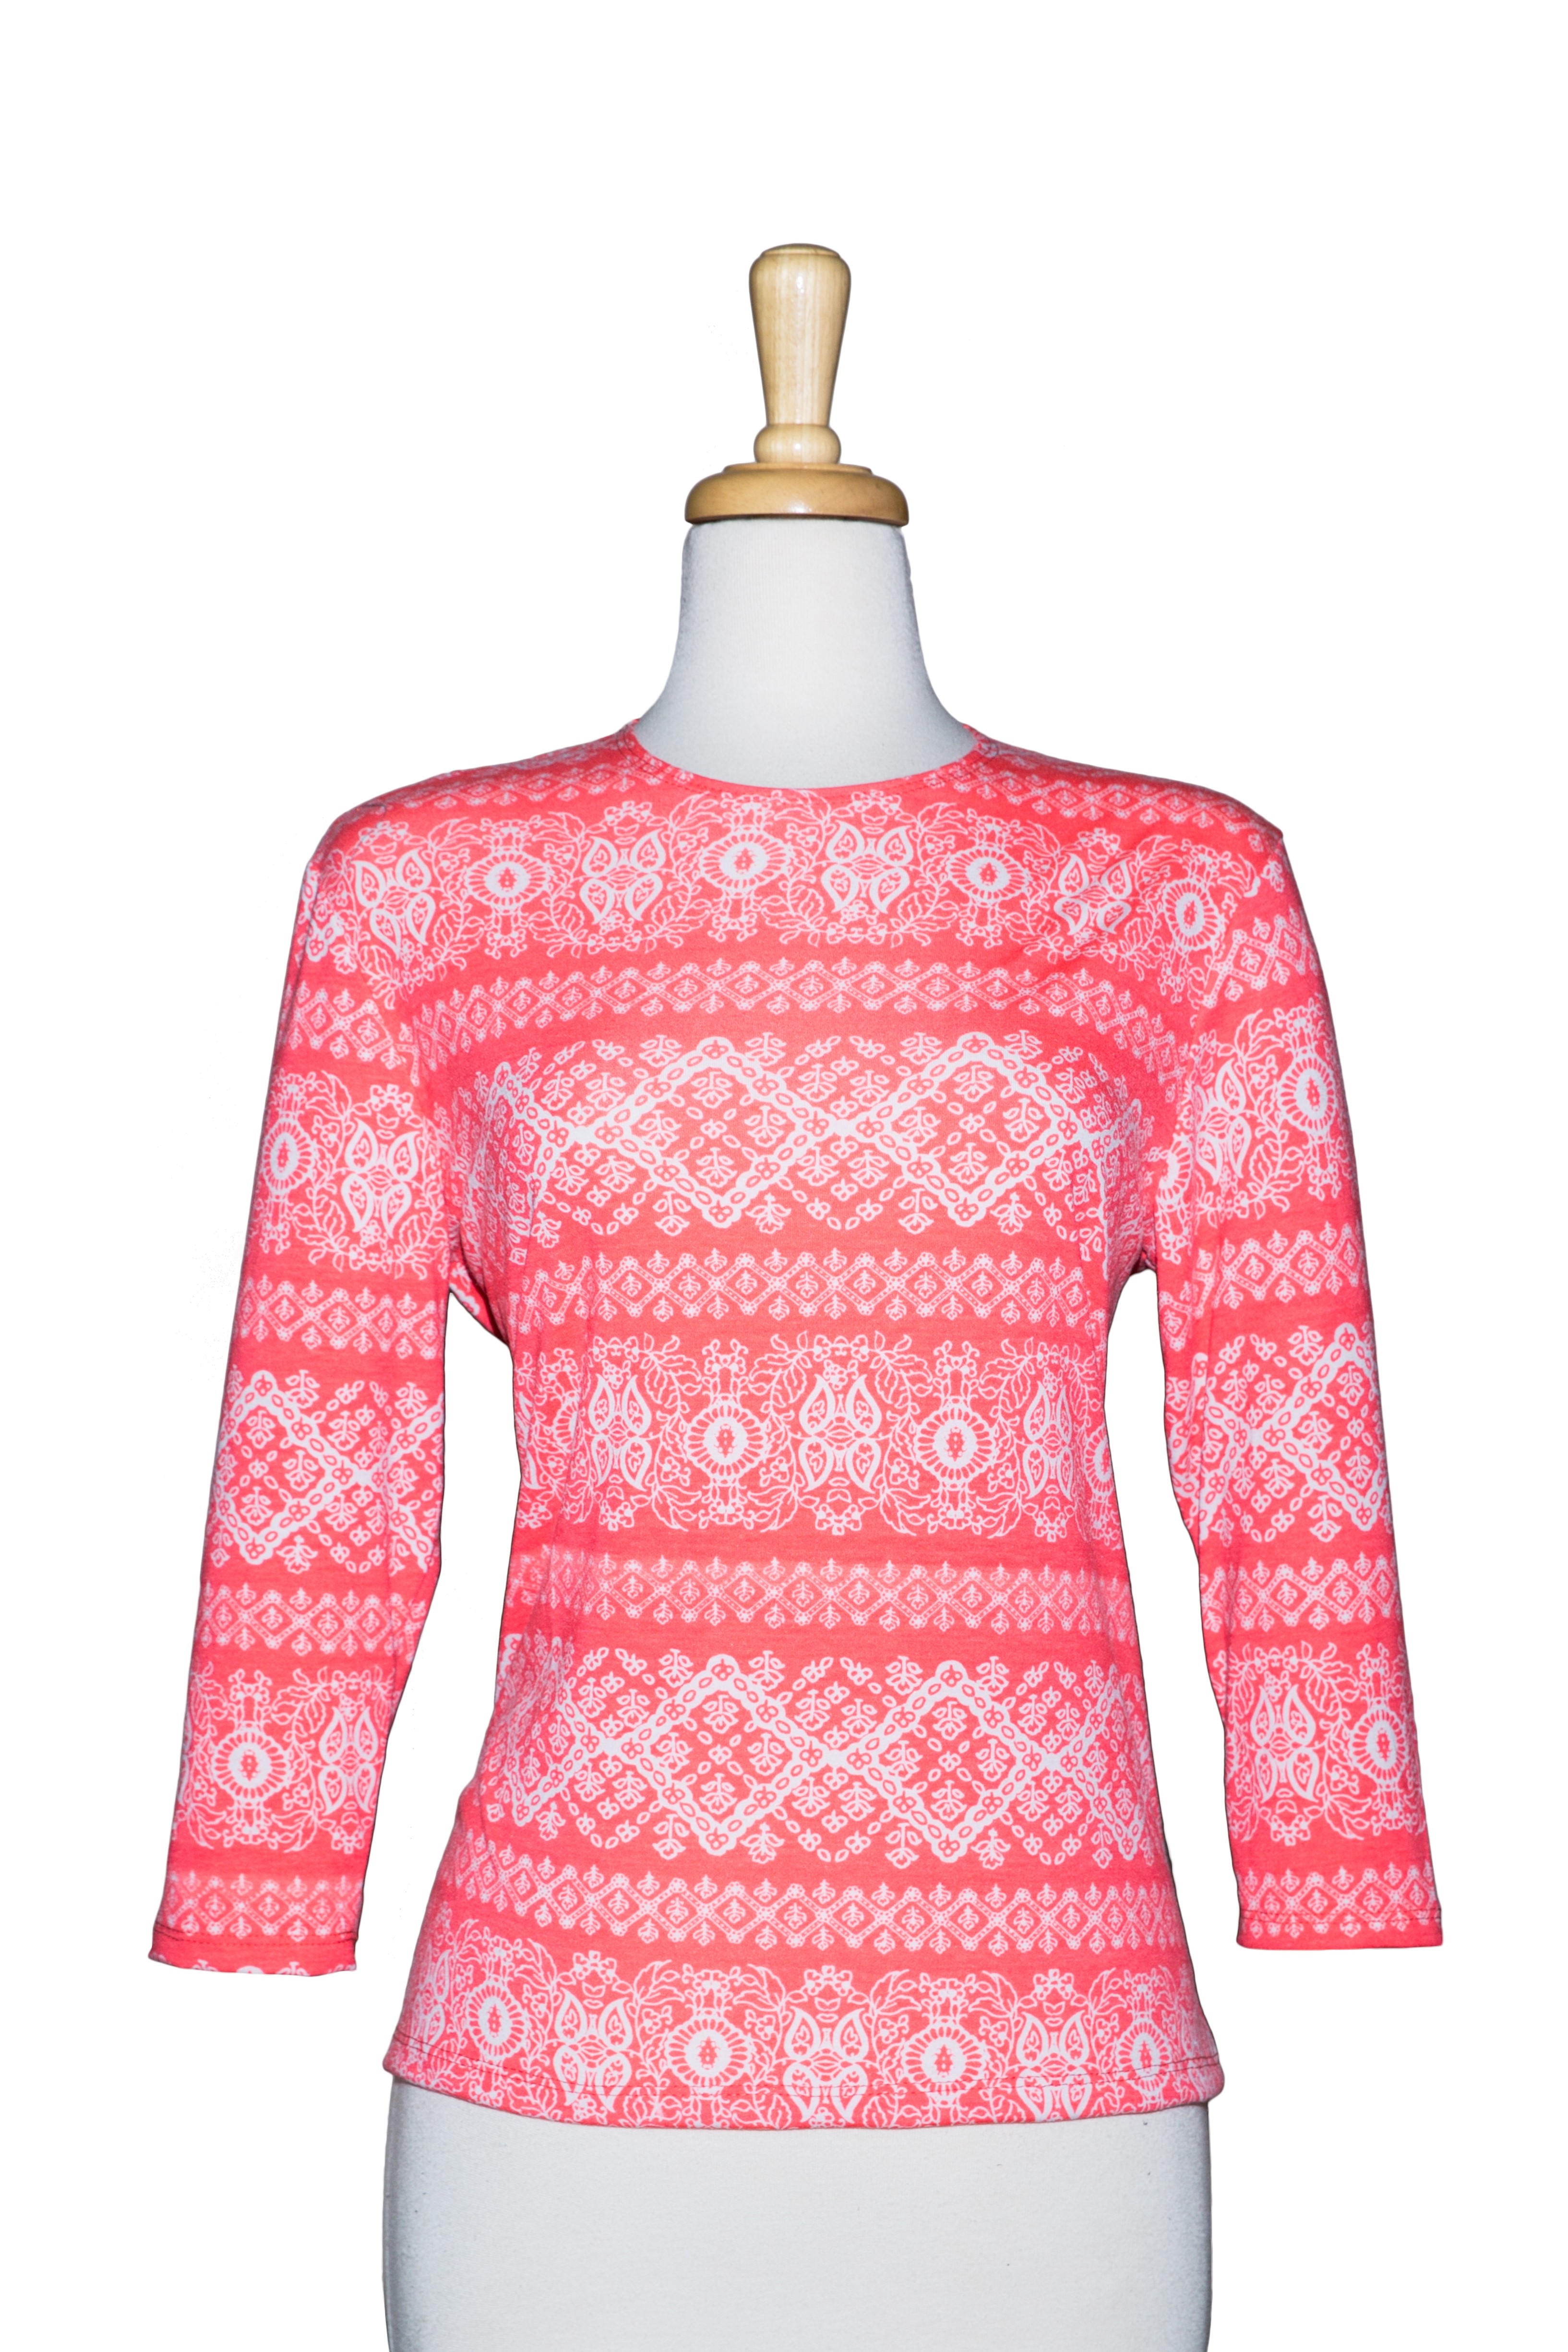 Plus Size Coral and White Diamonds 3/4 Sleeve  Cotton Top 